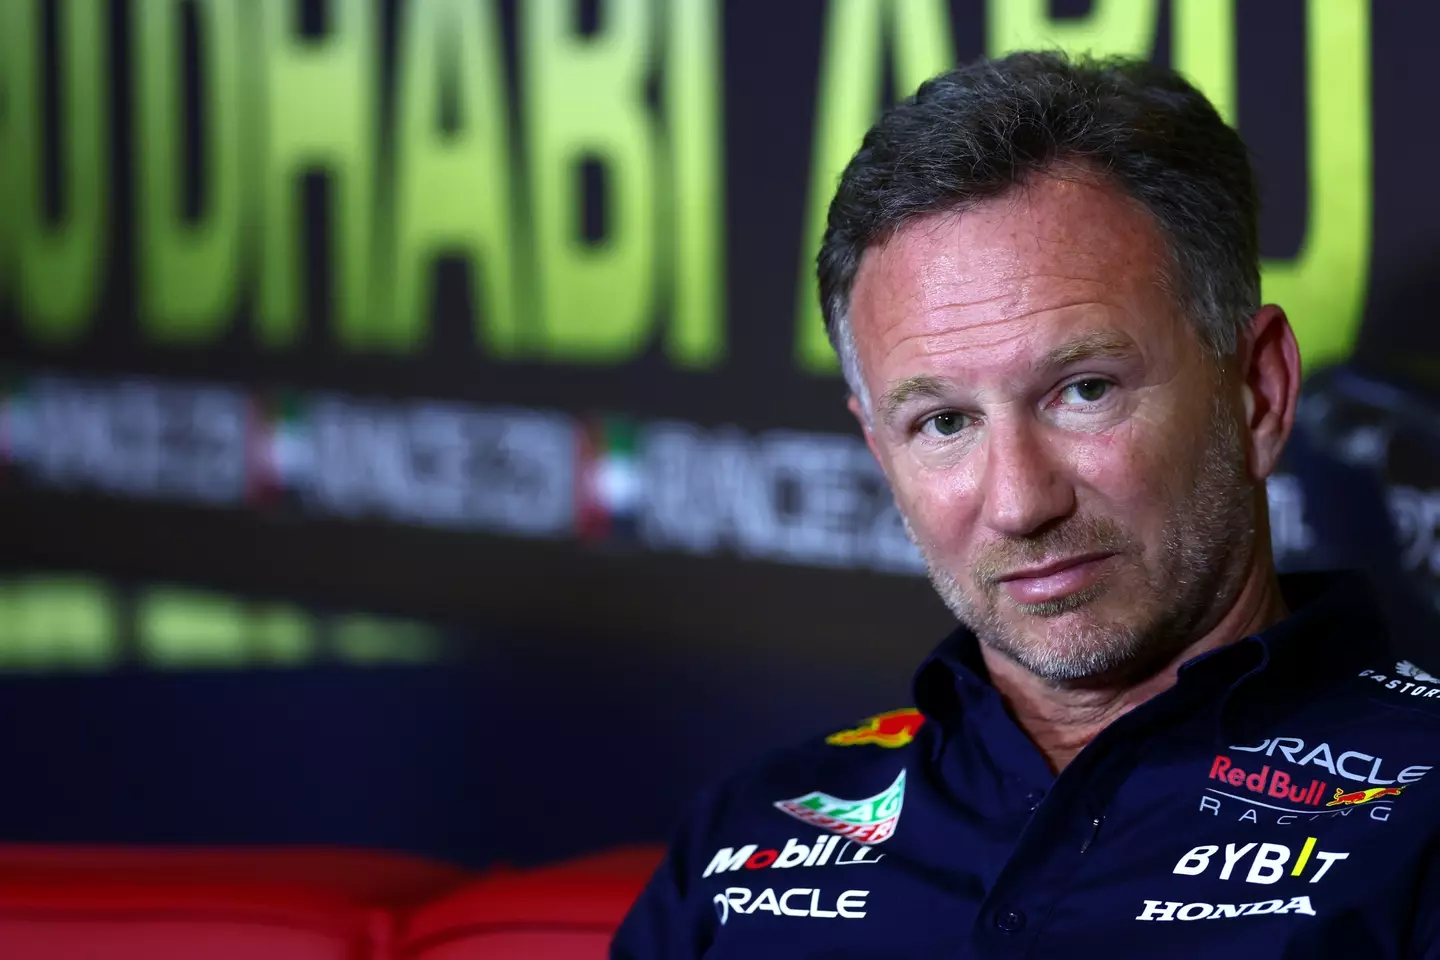 Red Bull says it is aware of the allegations and an independent investigation is underway.